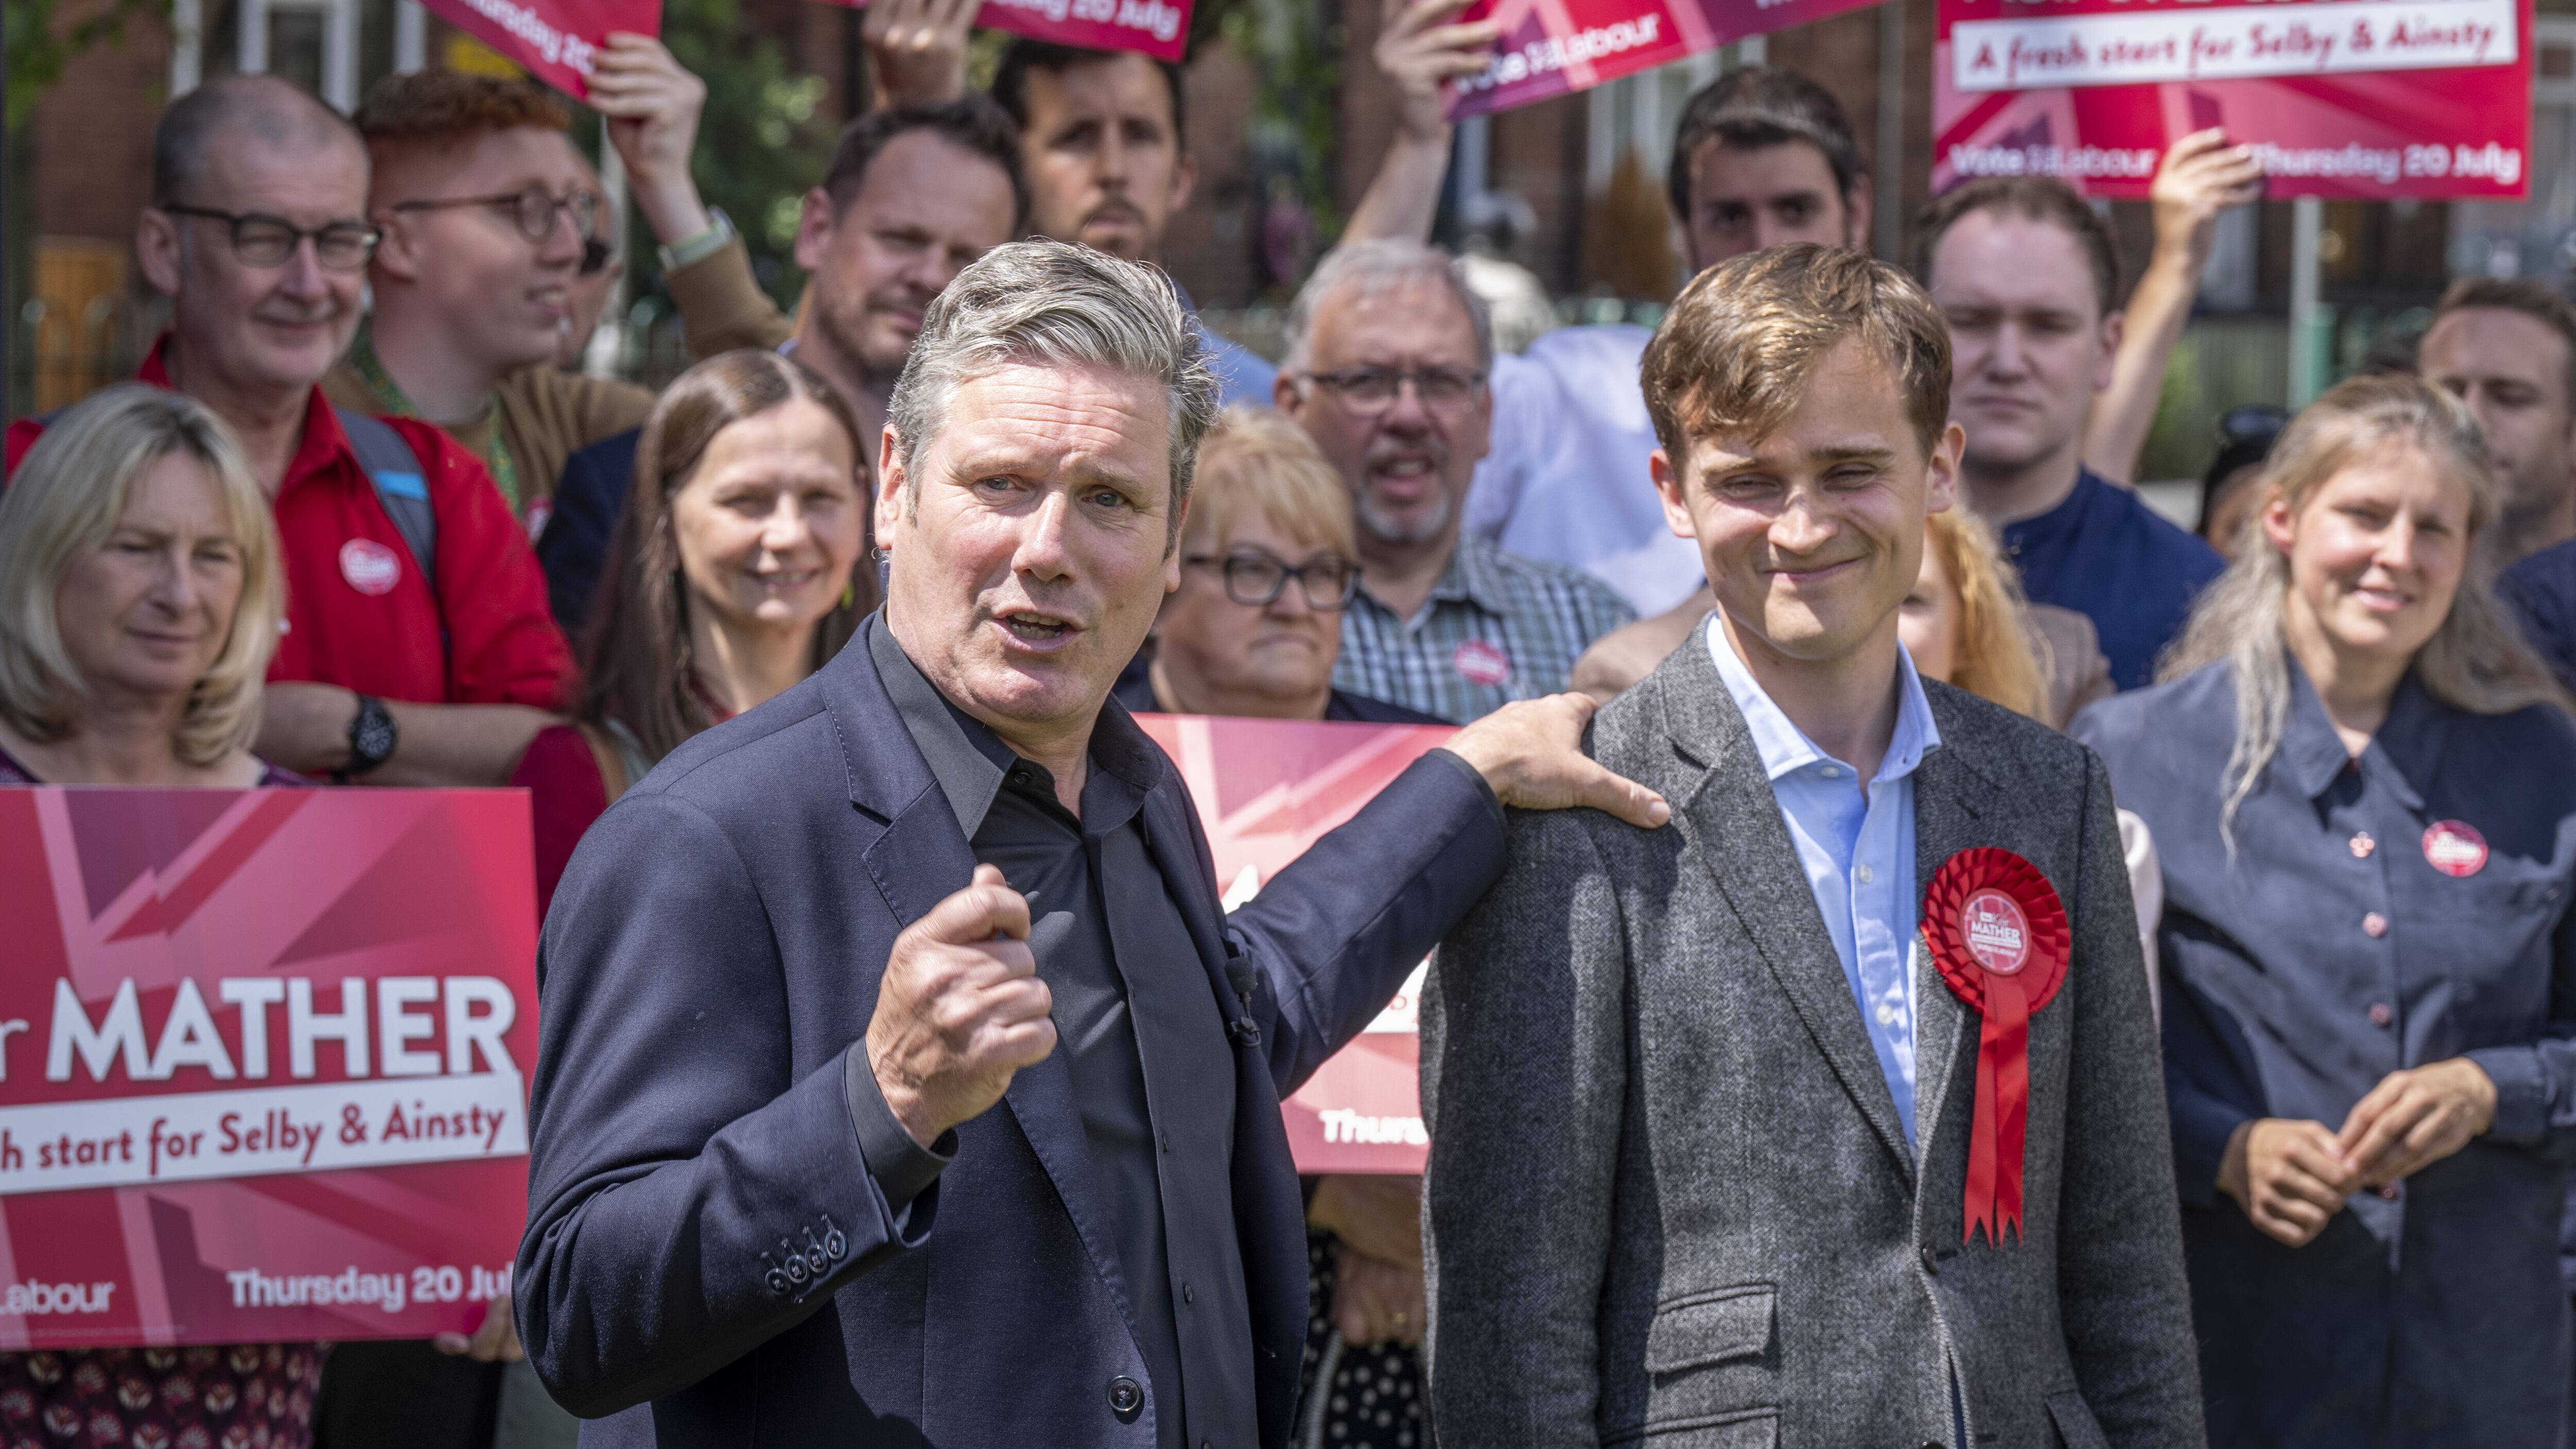 Labour believes Keir Mather, a 25-year-old Oxford graduate, is in with a chance in Thursday’s Selby and Ainsty by-election (Danny Lawson/PA)